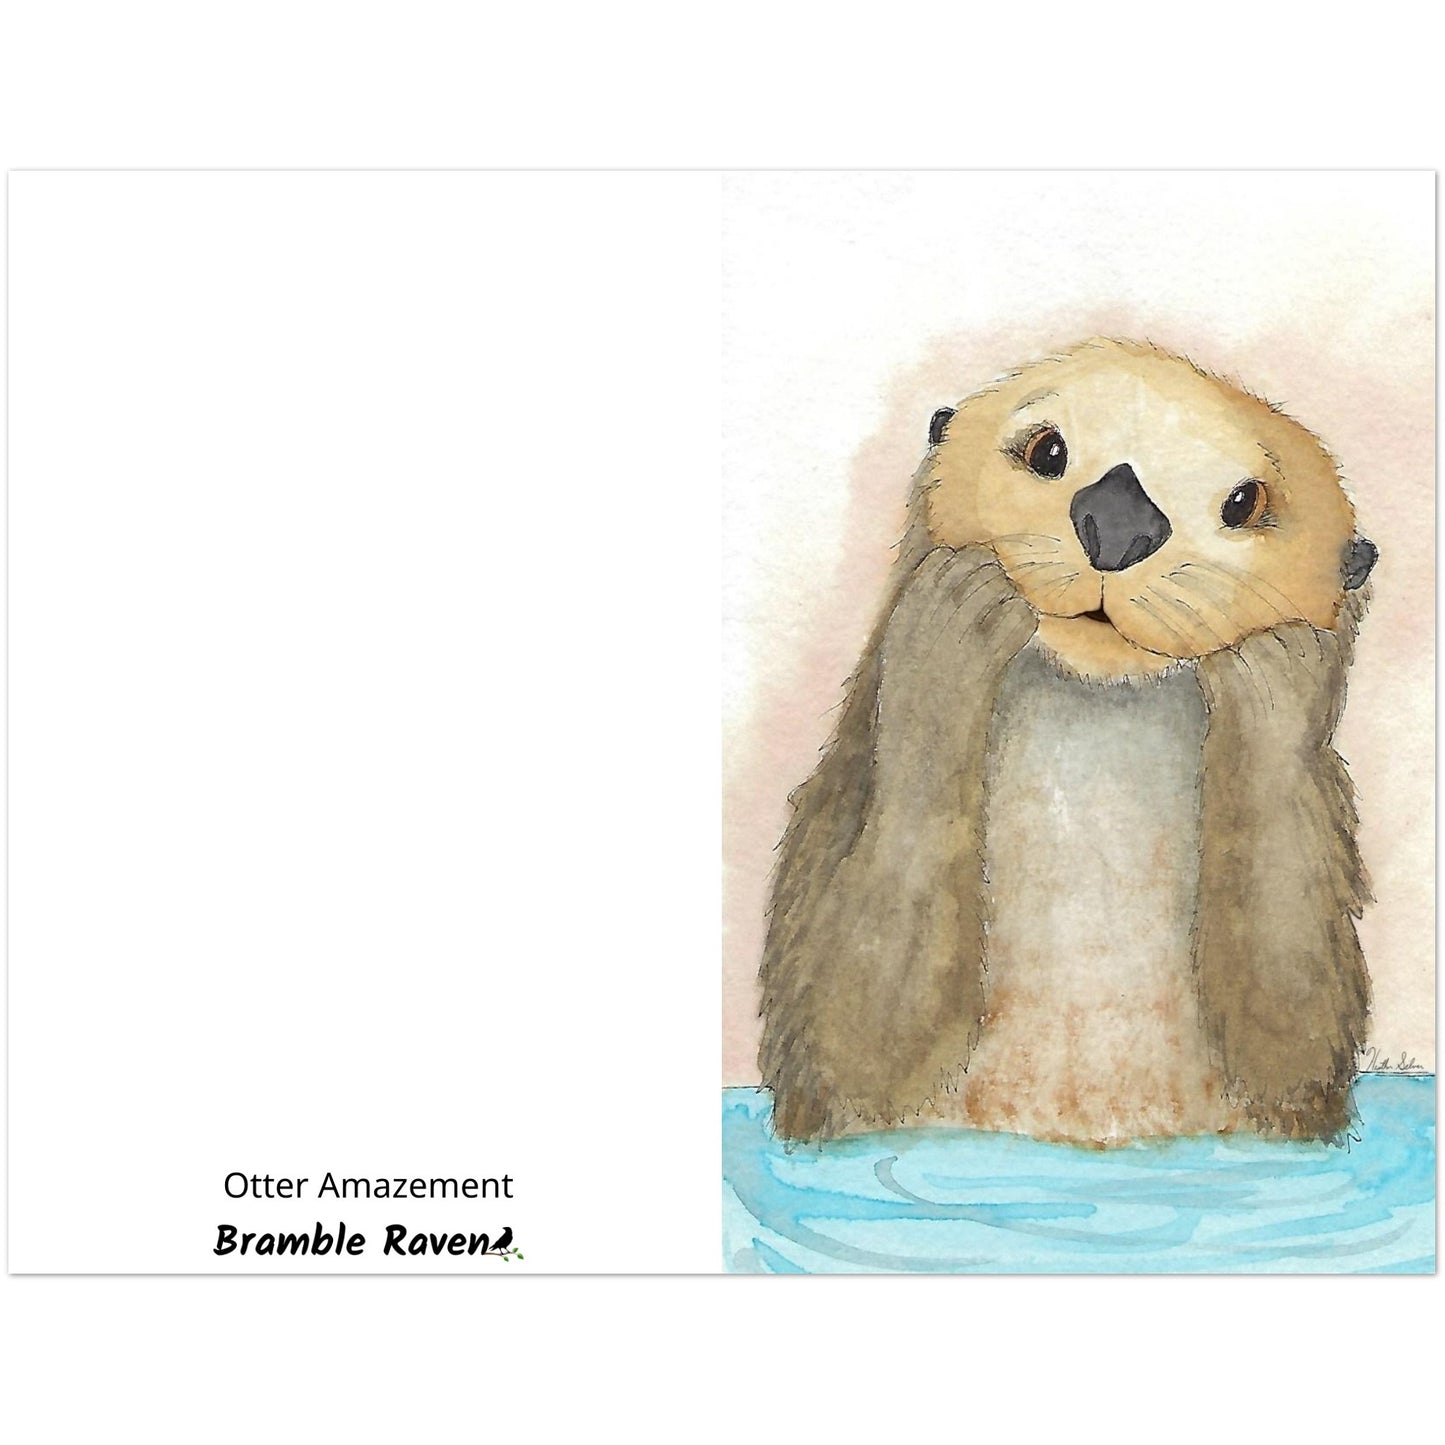 Pack of ten 5.5 x 8.5 inch greeting cards. Features watercolor print of a playful sea otter on the front. Inside is blank. Made of coated paperboard. Comes with envelopes.